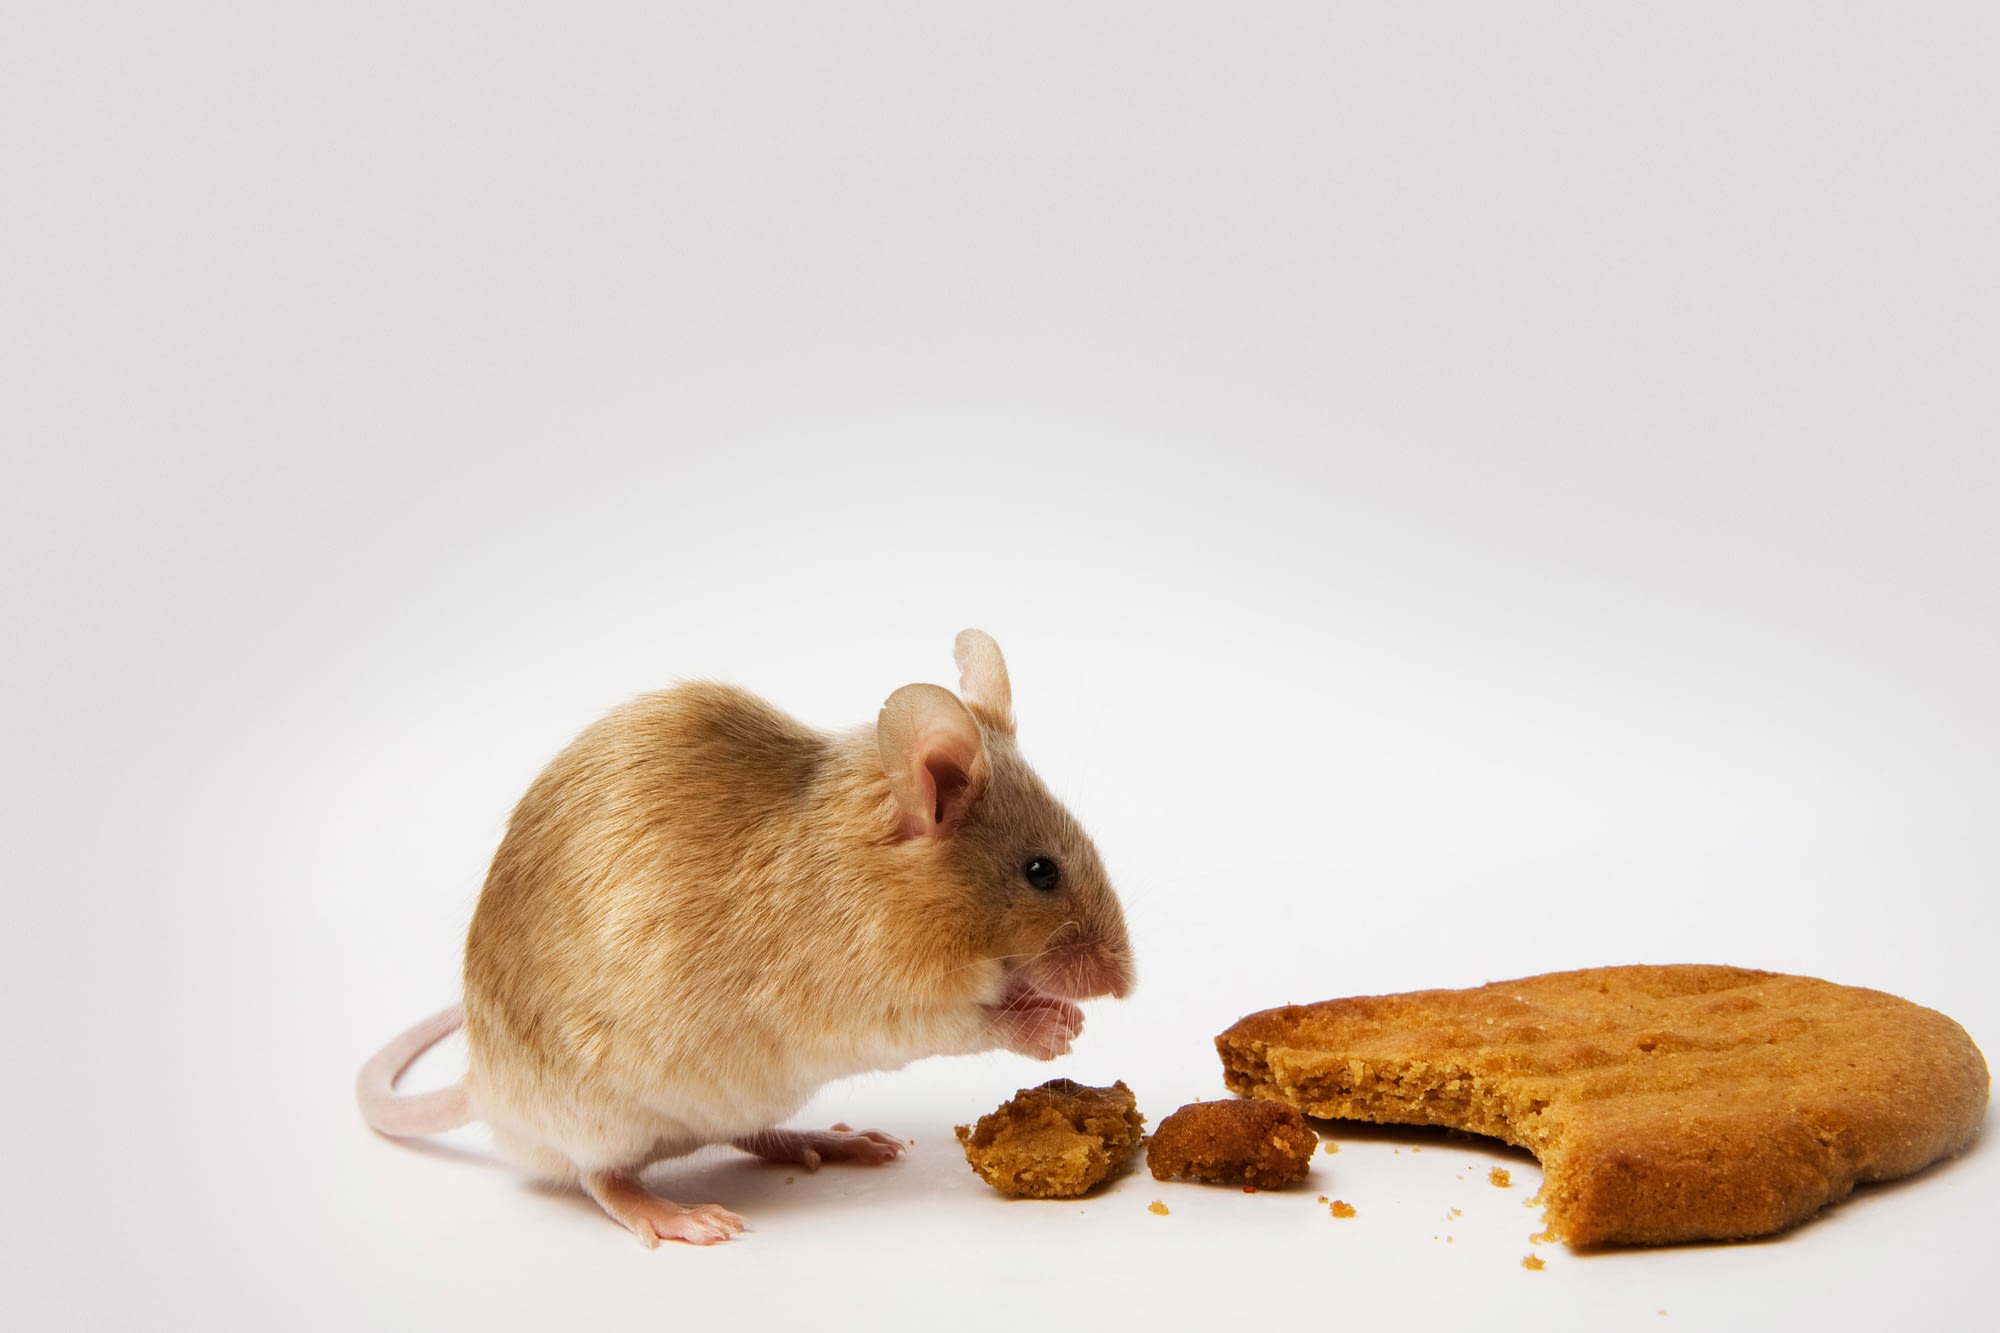 How long can mice go without food?